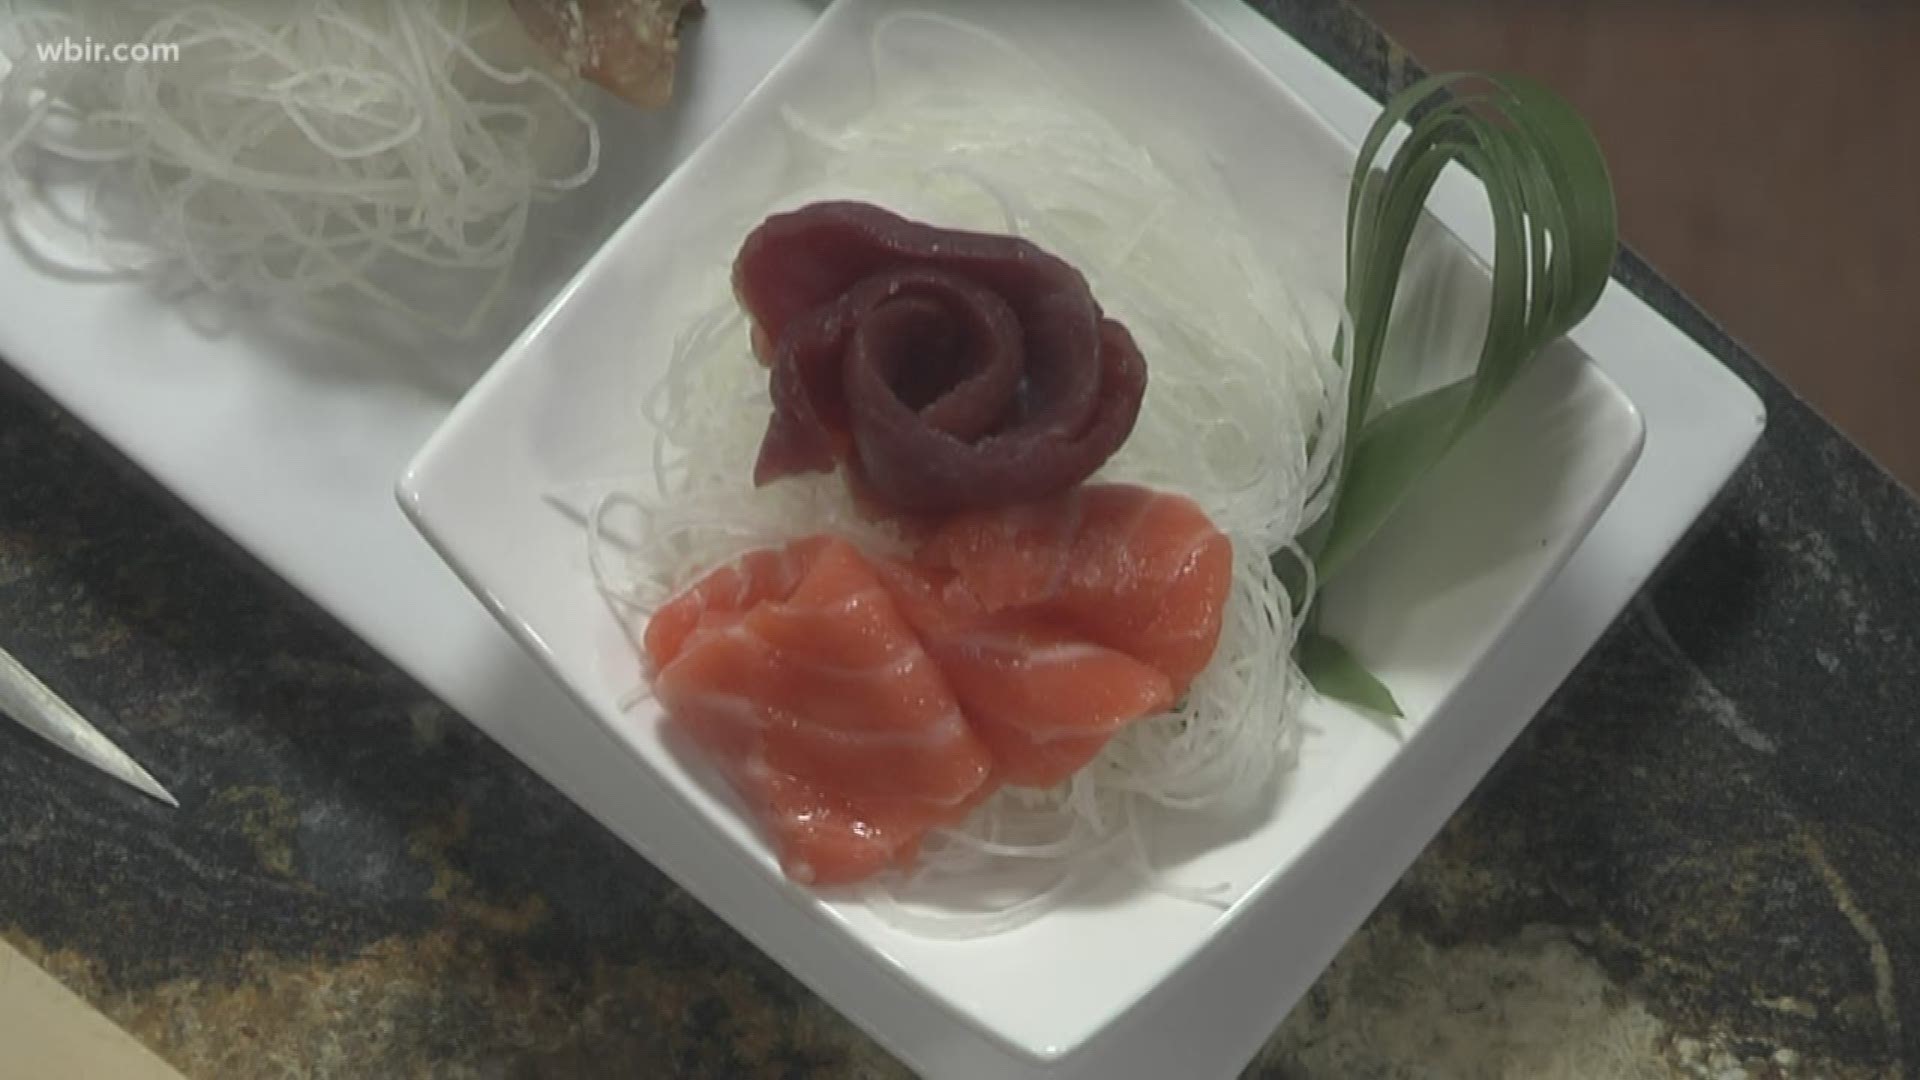 Patrick Rathida from Tomo Poke Bowl is with us in the kitchen to show us how to make some Valentine's Sushi Specials.